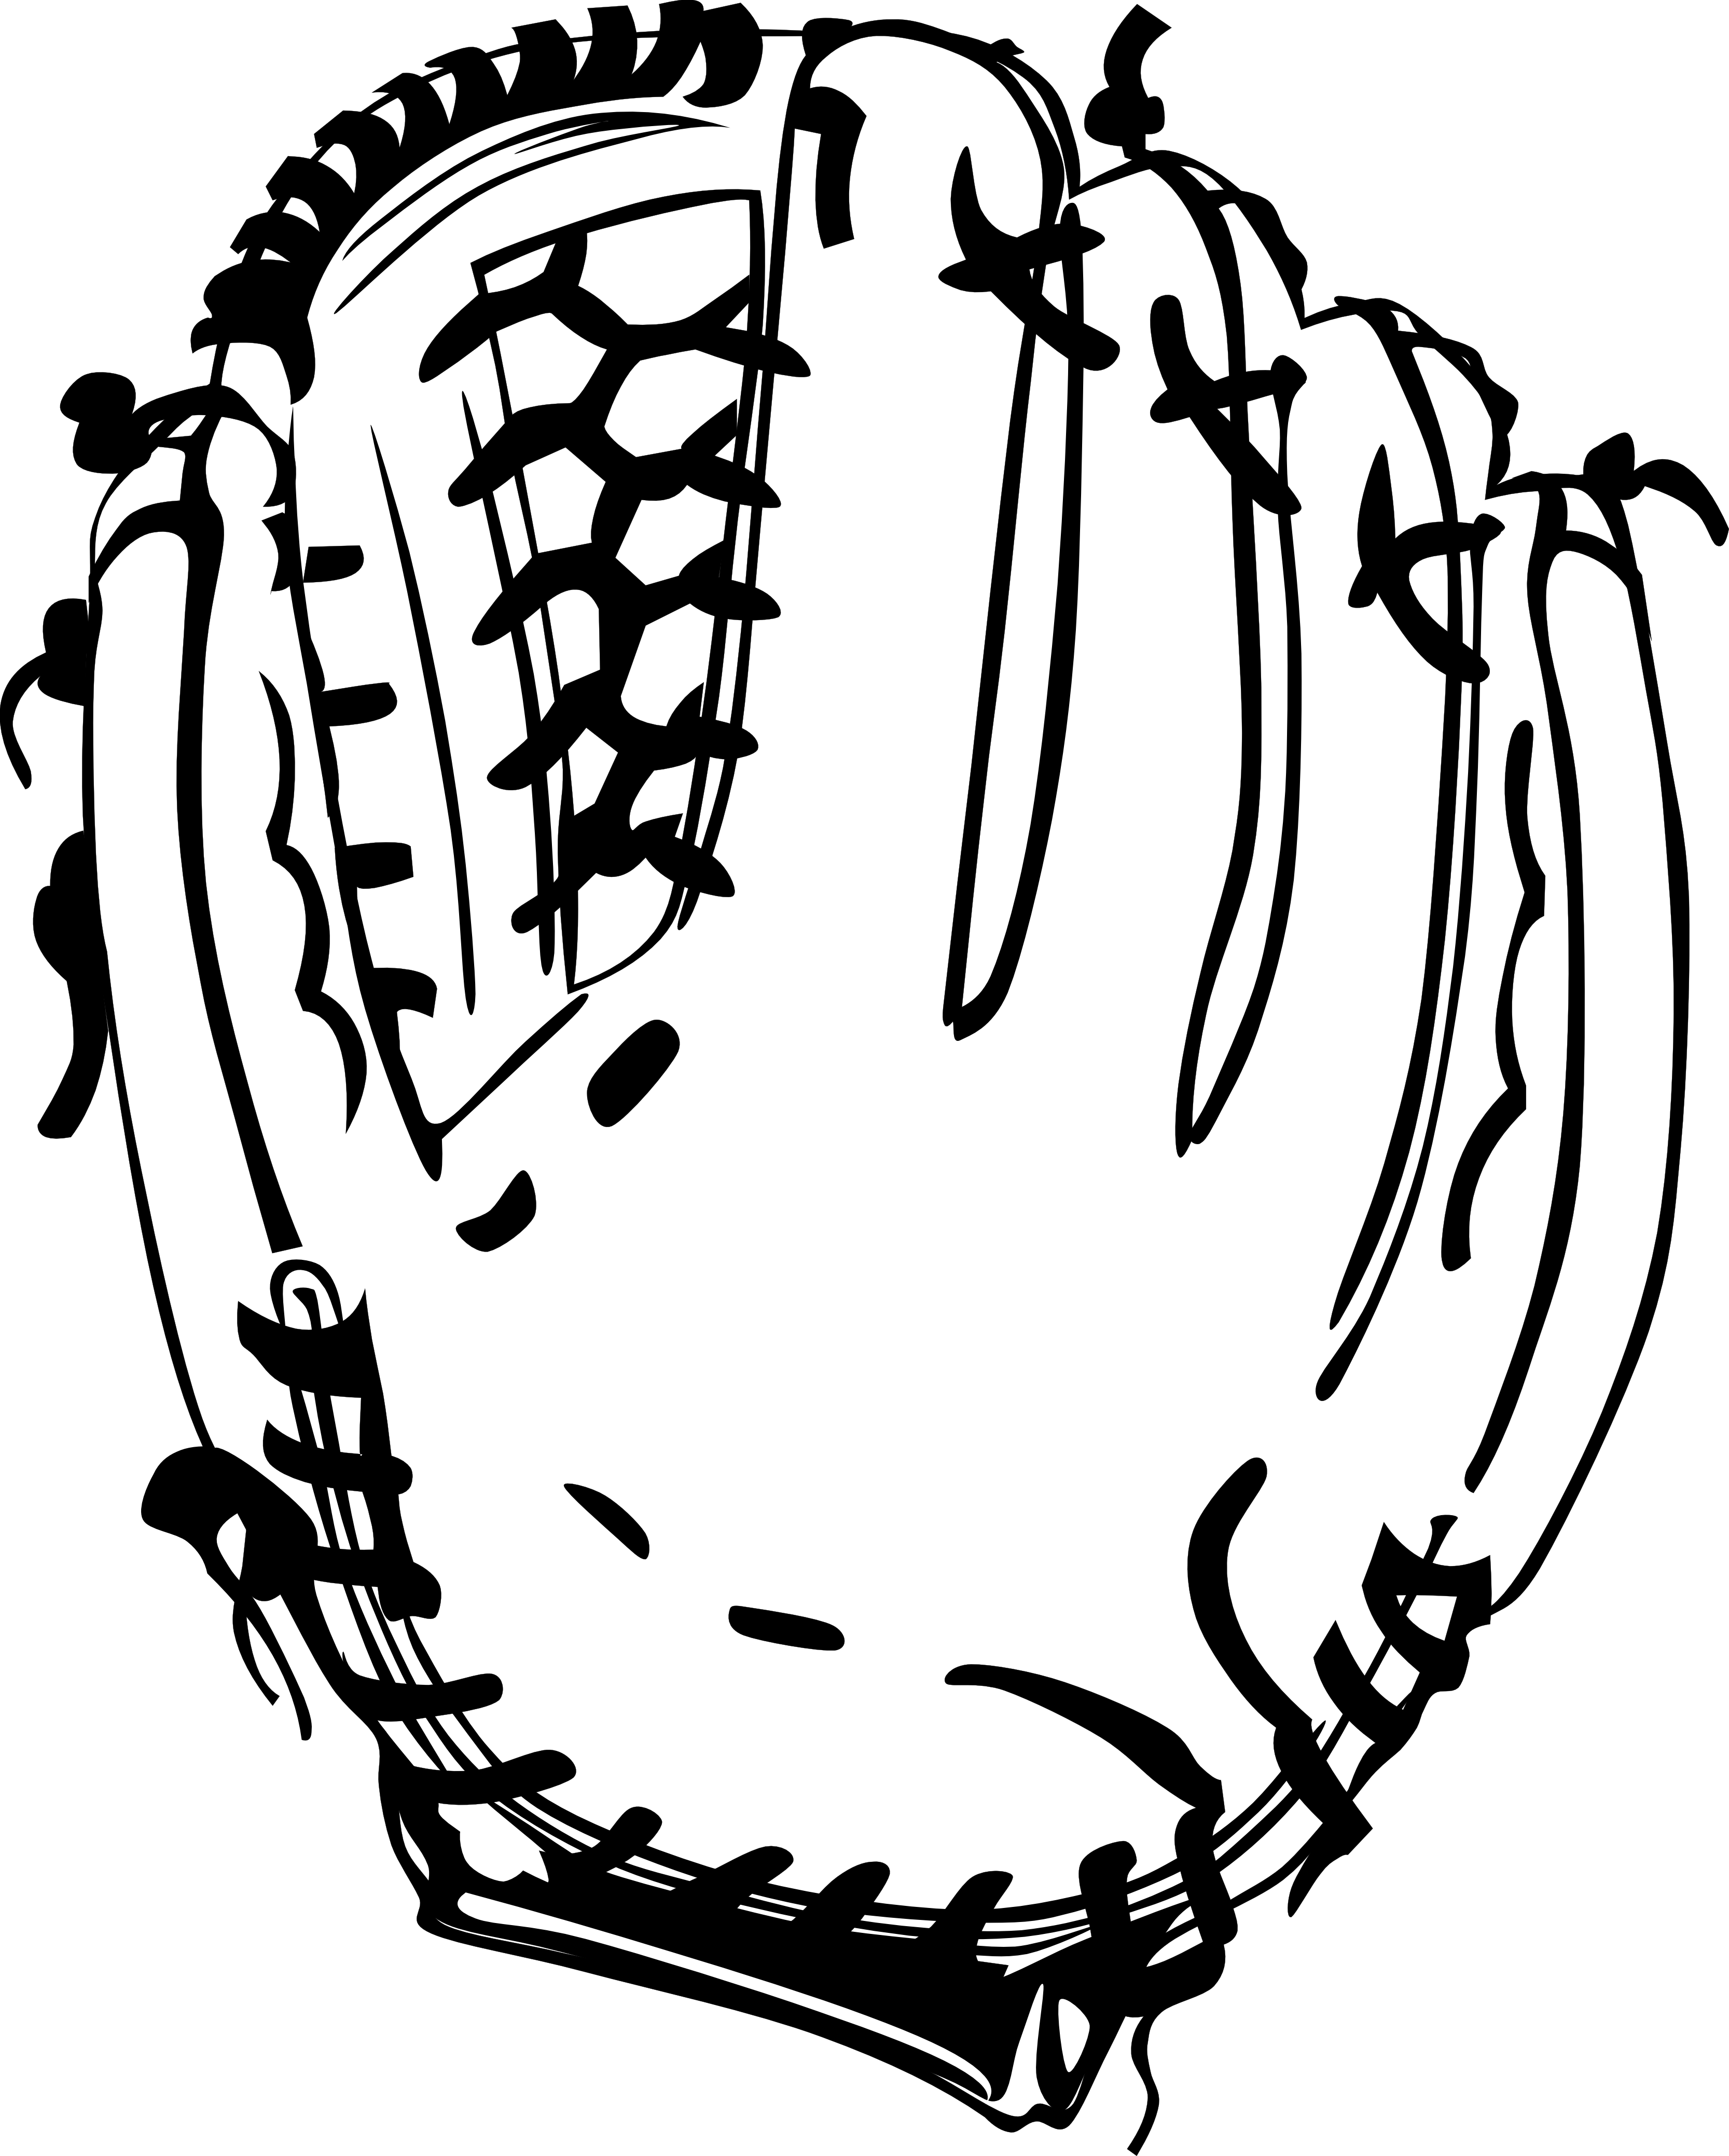 Black And White Baseball Player Clipart   Clipart Panda   Free Clipart